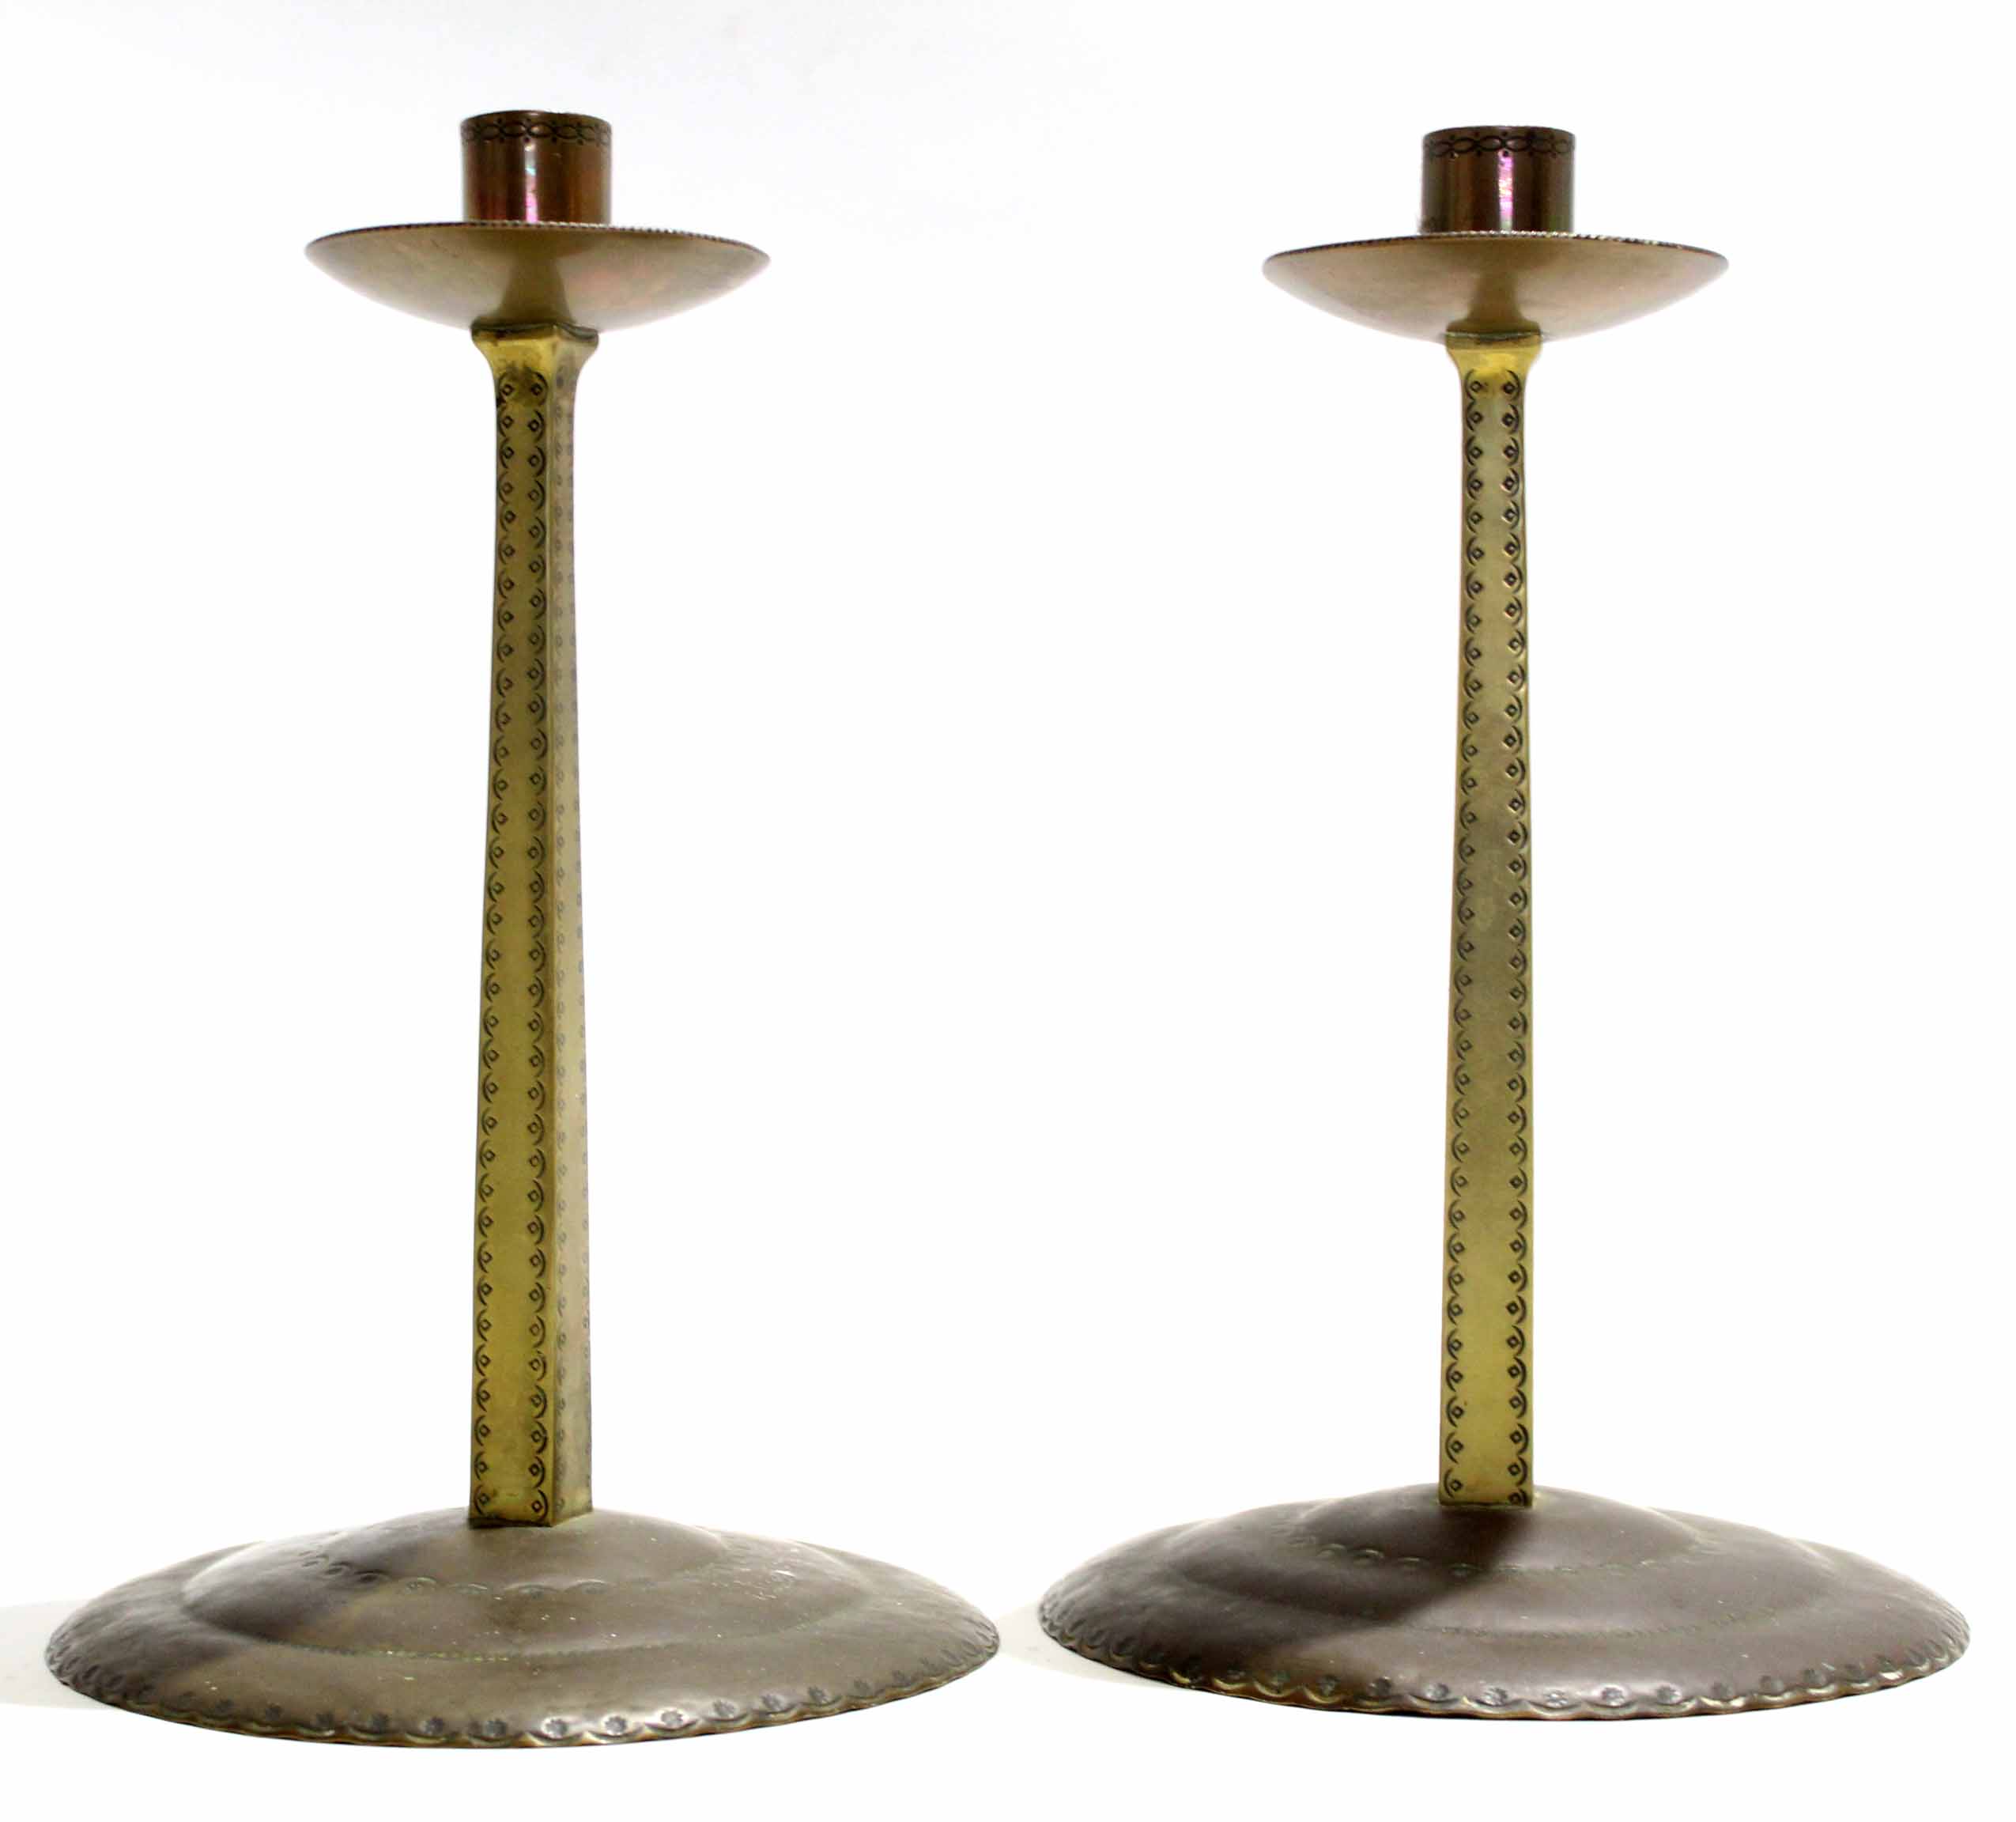 Russell & Sons pair of Arts & Crafts "Lygon" brass candlesticks, possibly manufactured in the